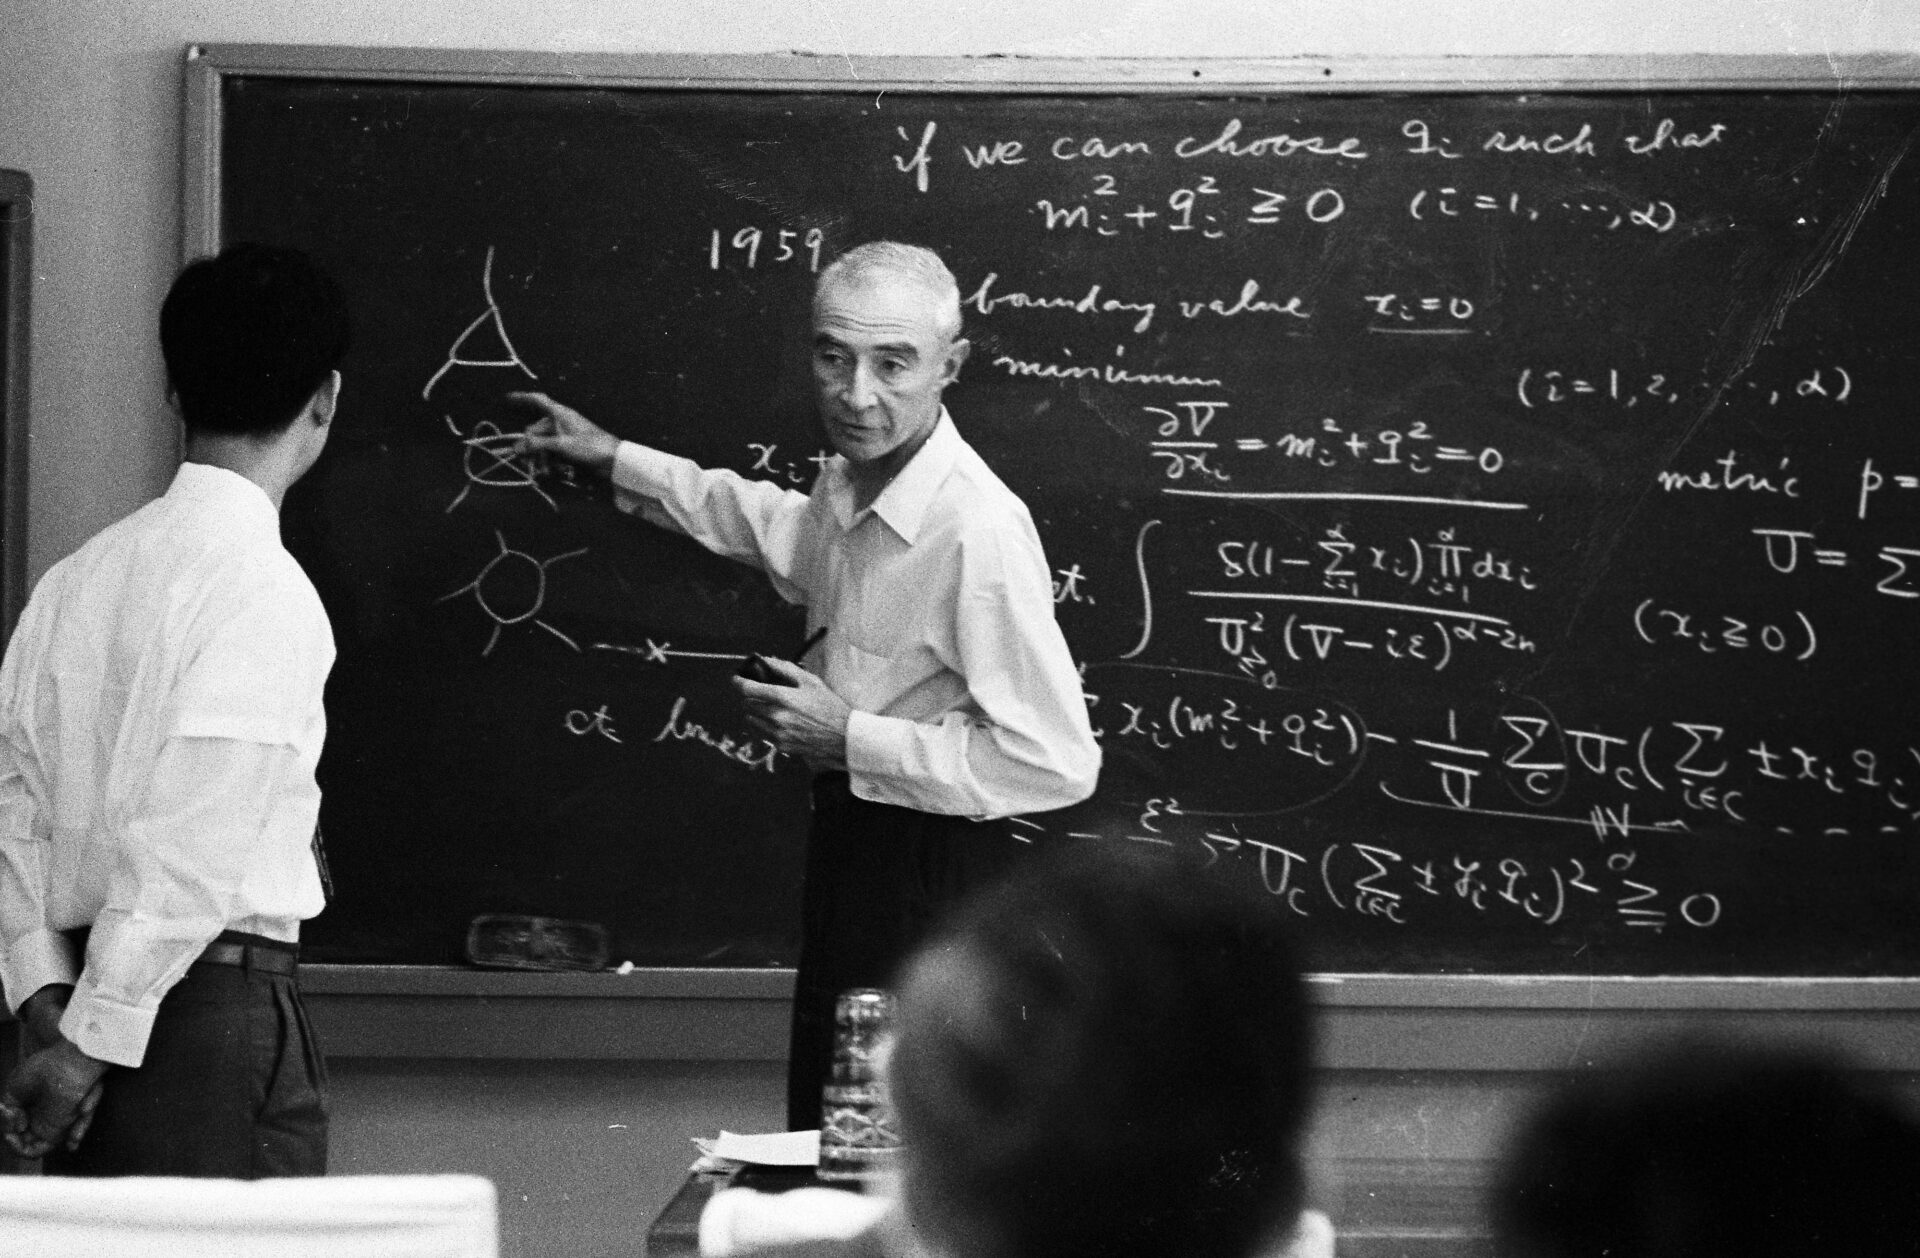 Oppenheimer lecturing during his visit to Japan in 1960